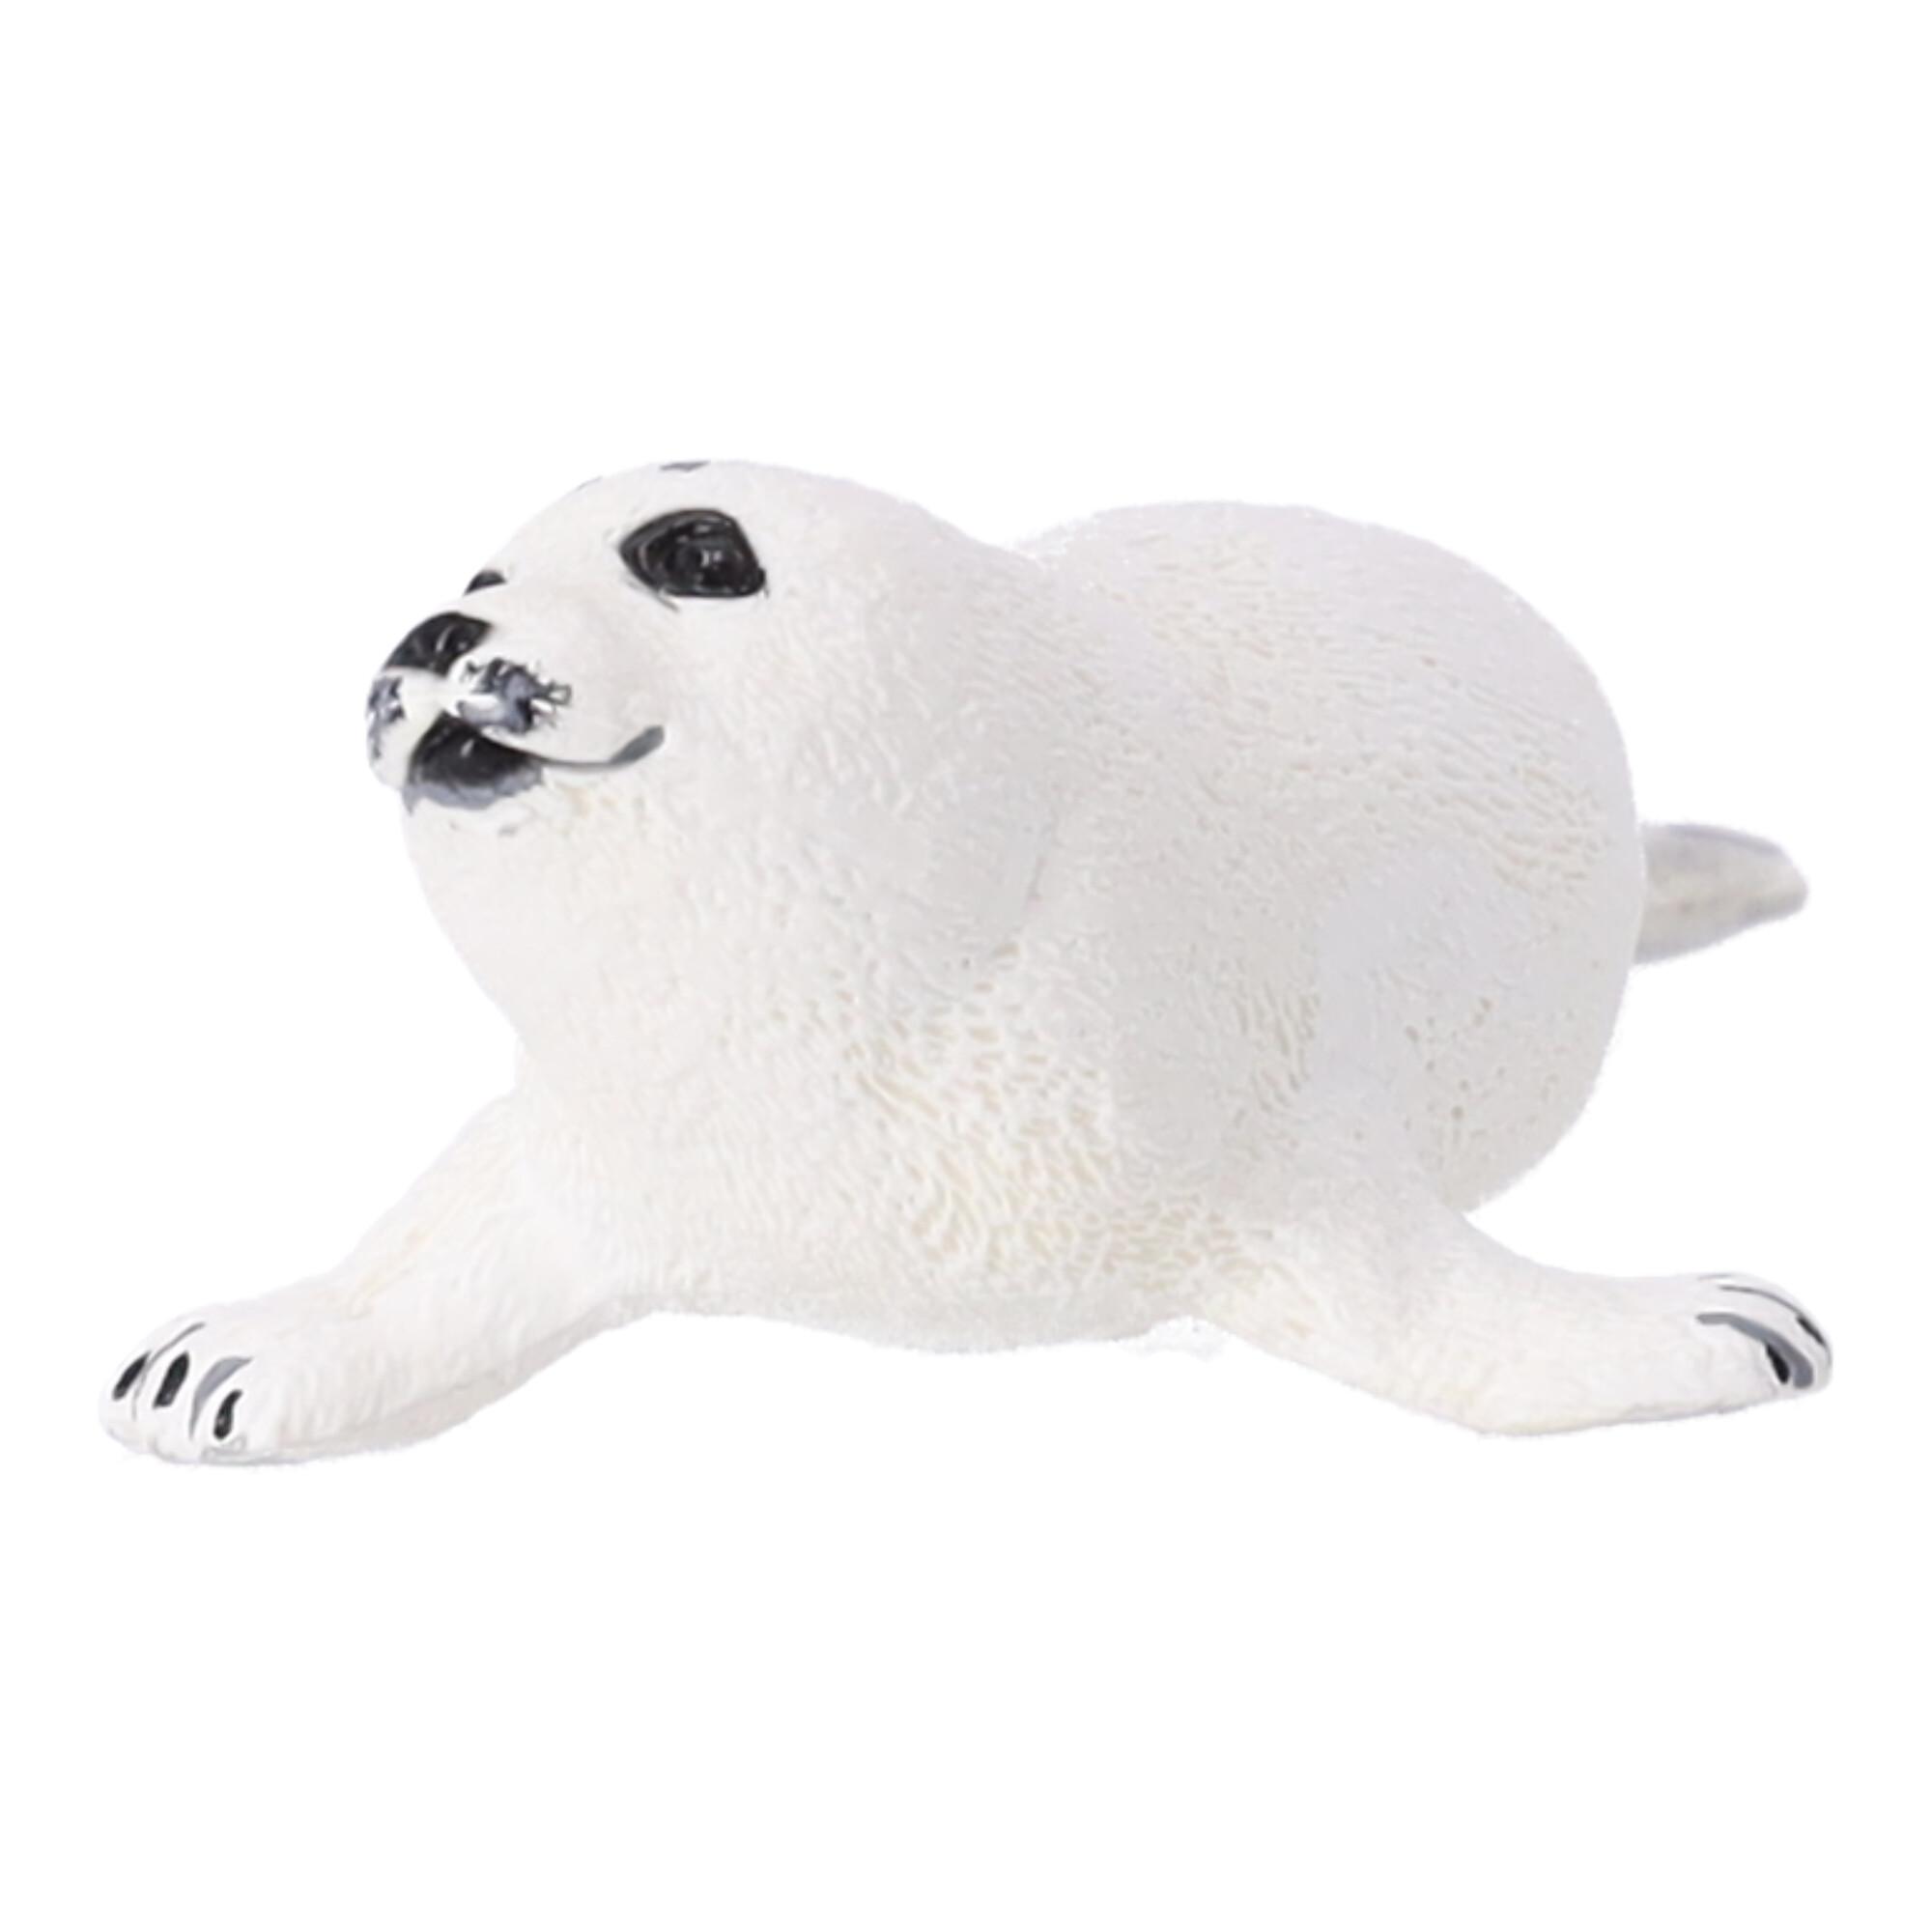 Collectible figurine Seal baby, Papo